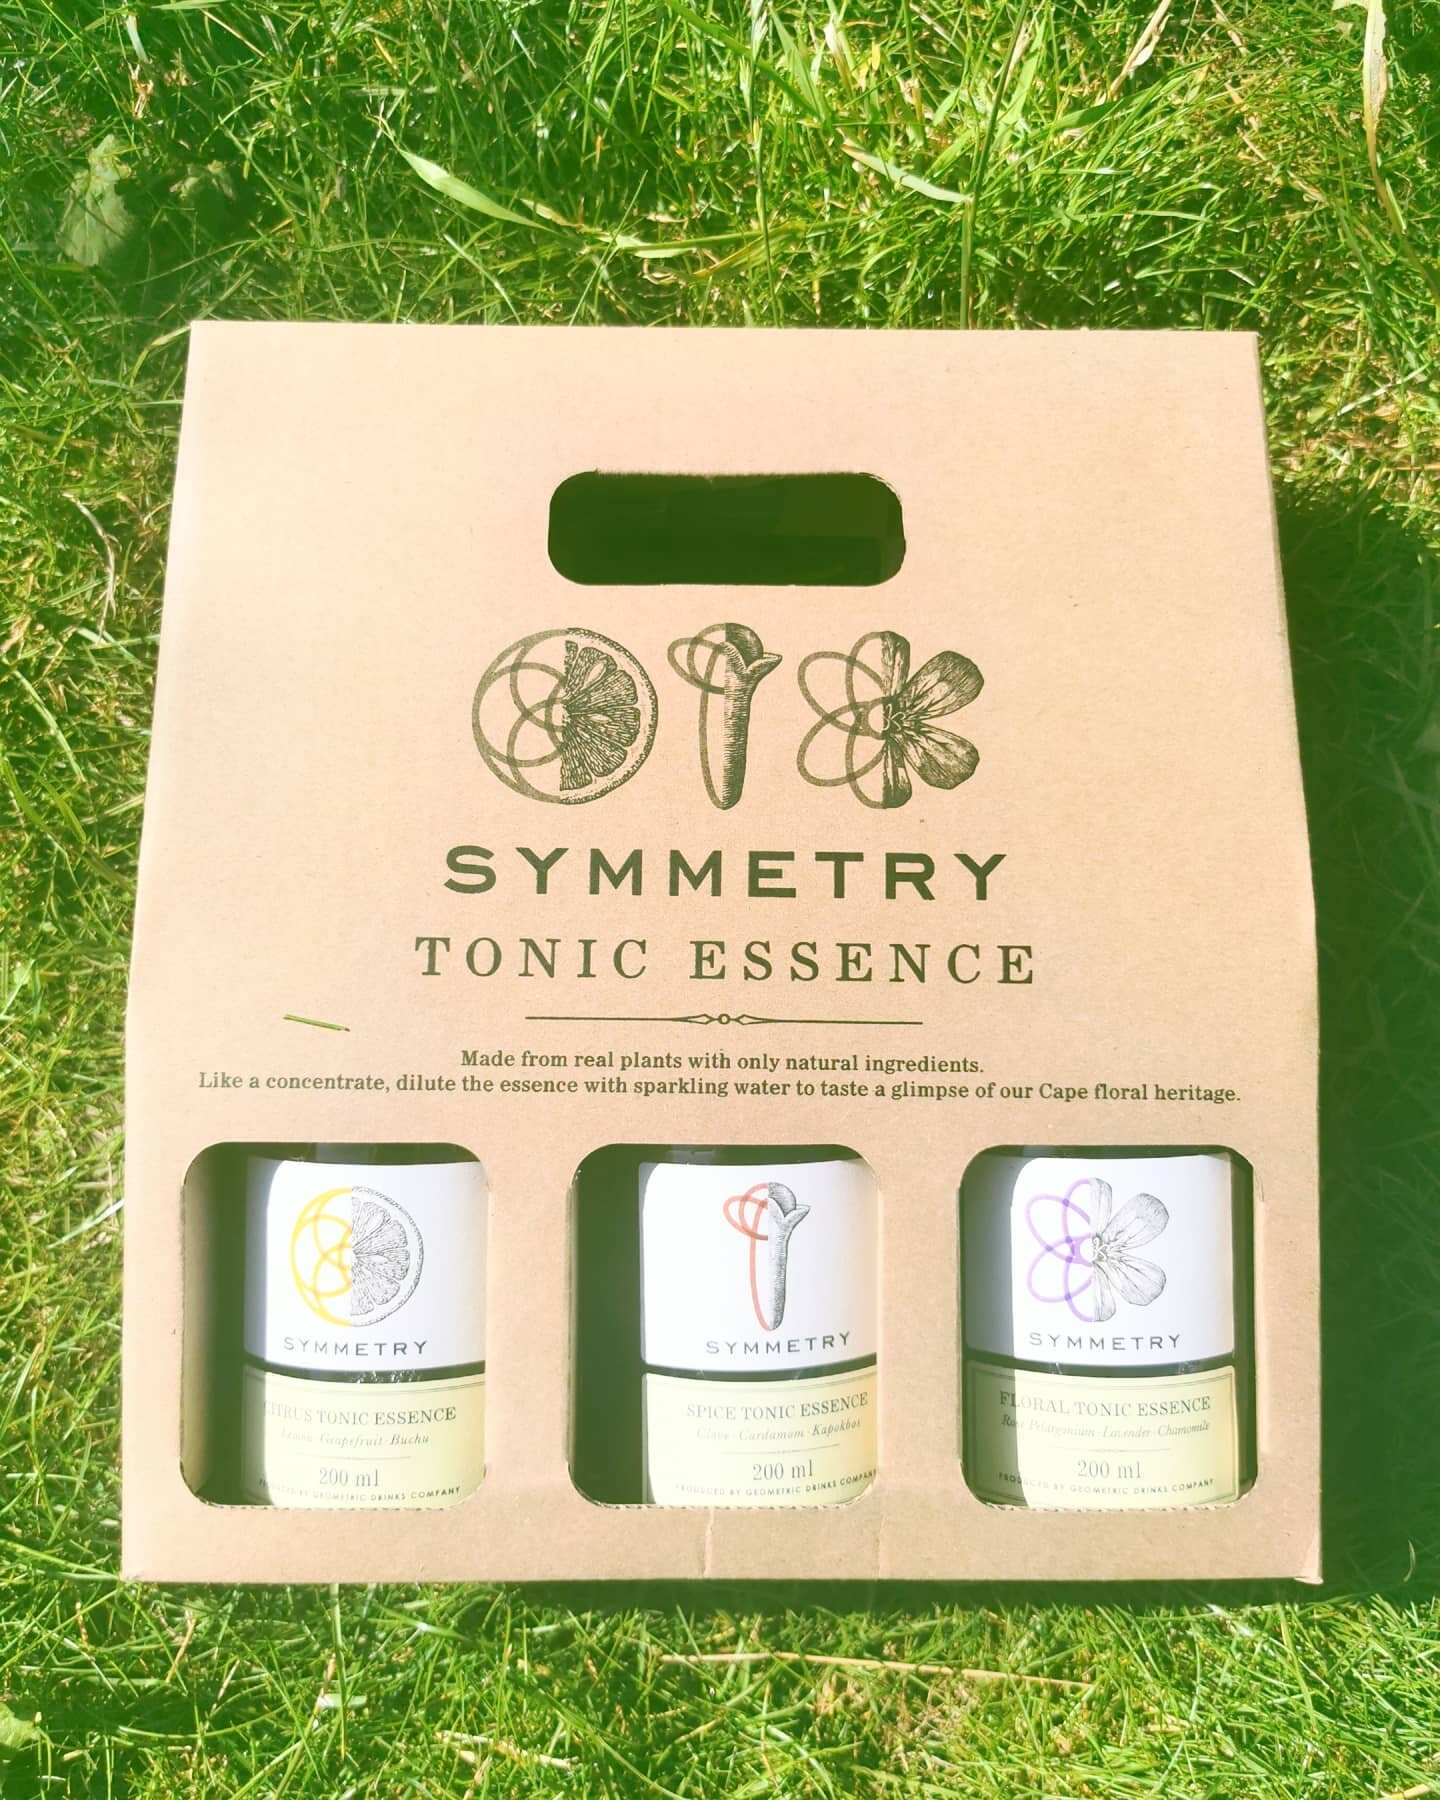 NEW ARRIVAL!! 

@symmetrybotanical Essences are the real deal in every way.

No alcohol
Raw
Natural
No additives
Low in sugar

Great on their own with soda or sparkling. Or just add gin to the mix for the ULTIMATE G&amp;T.

We have just received a li